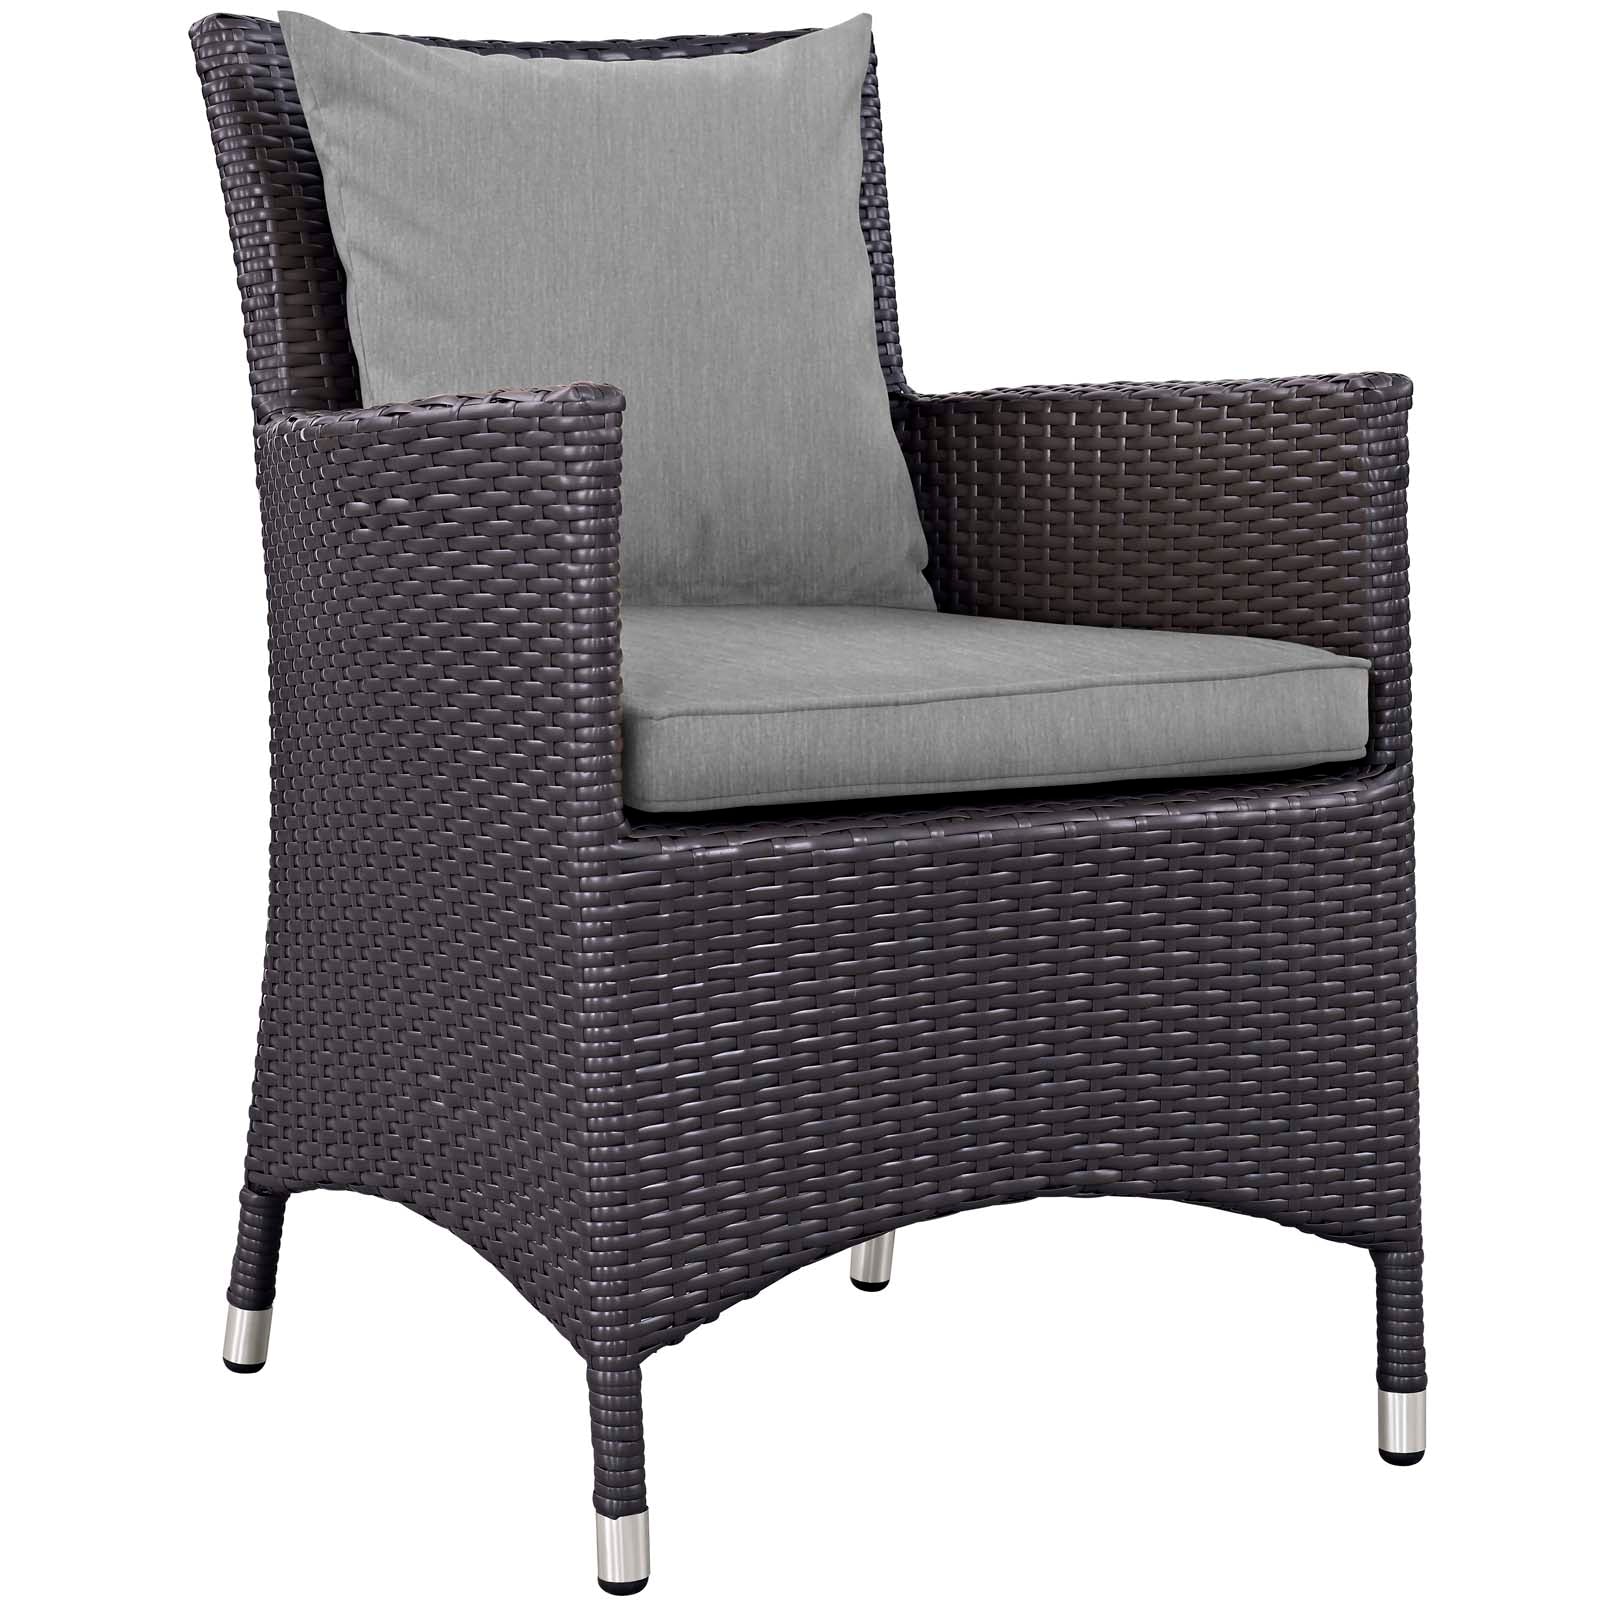 Modway Outdoor Dining Chairs - Convene Dining Outdoor Patio Armchair Espresso Gray